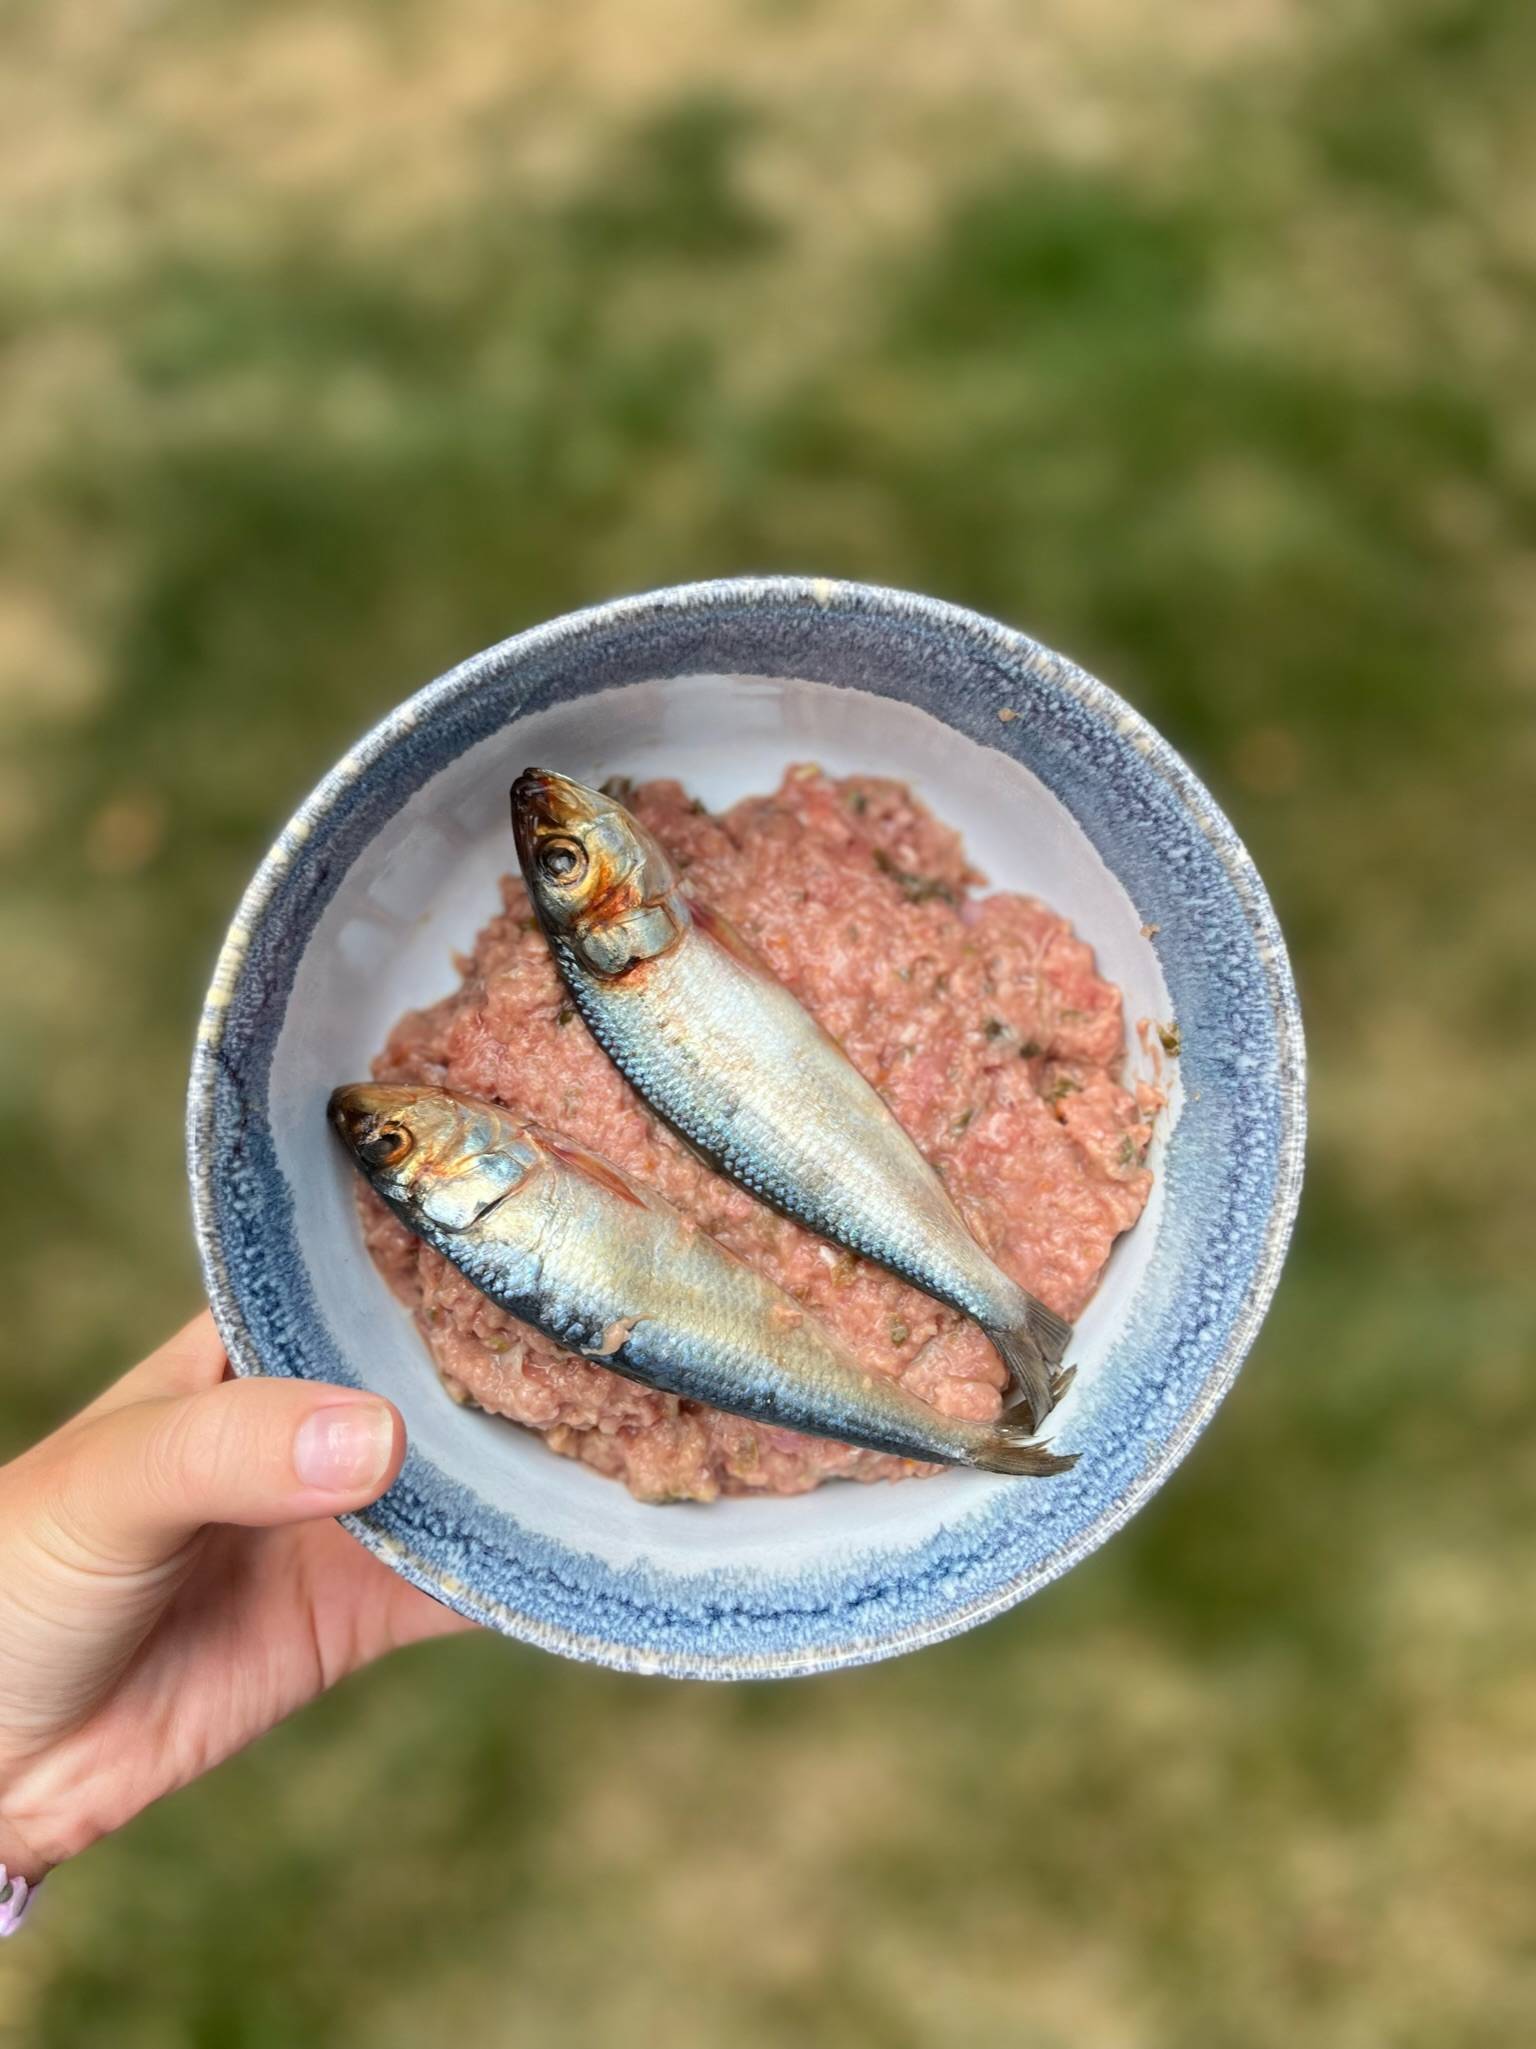 Two raw sardines on raw meat in blue bowl held by hand.